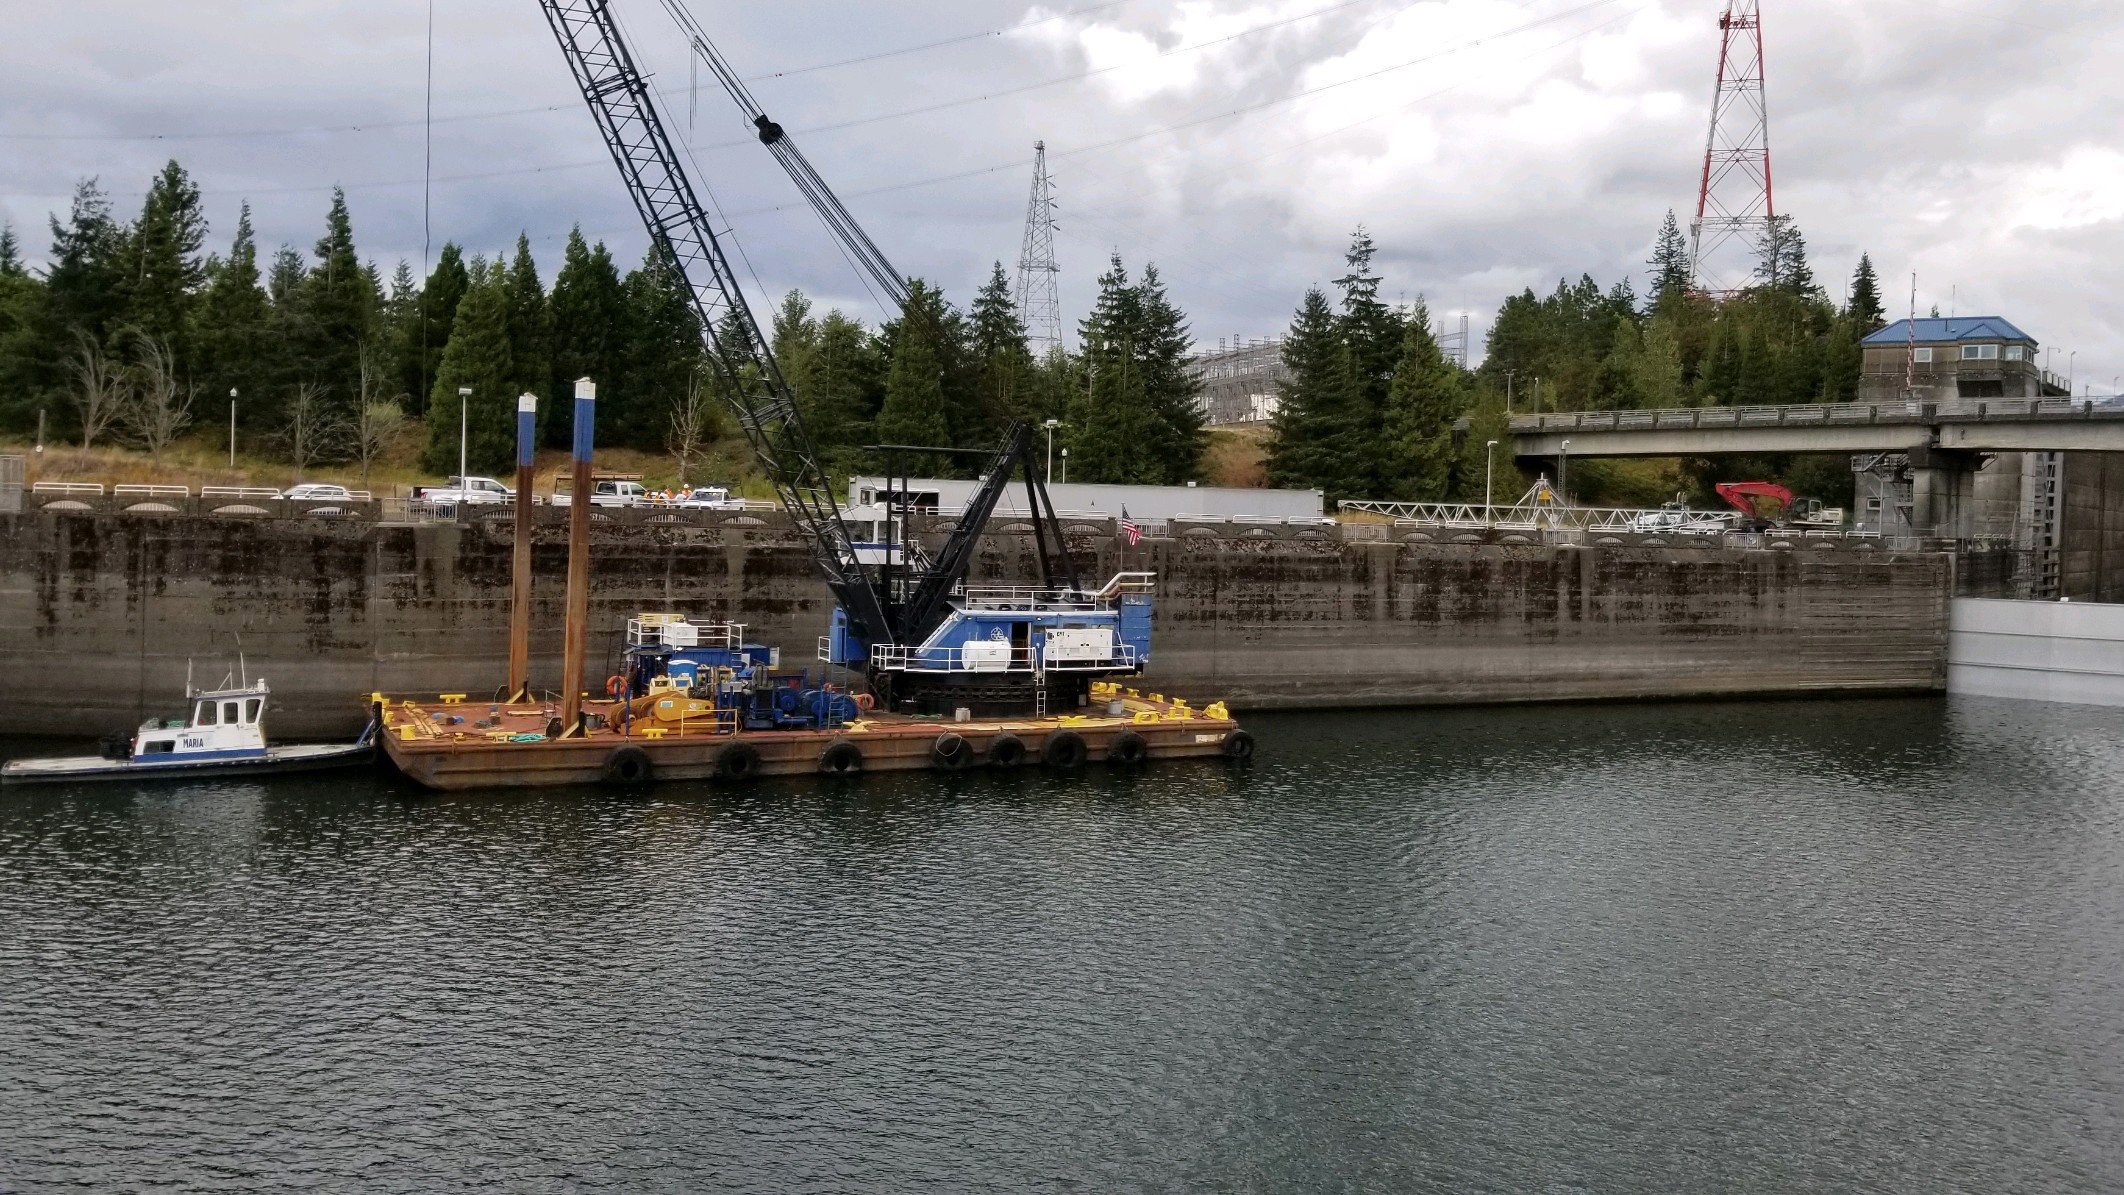 This Sunday, Sept. 8, 2019 photo provided by the U.S. Army Corps of Engineers shows a boat lock on the Bonneville Dam on the Columbia River that connects Oregon and Washington at Cascade Locks., Ore. A critical lock has shut down for repairs, meaning barges that shuttle millions of tons of wheat, wood and other inland goods to the Pacific Ocean for transport to Asia can't move. CREDIT: U.S. Army Corps of Engineers/Twitter